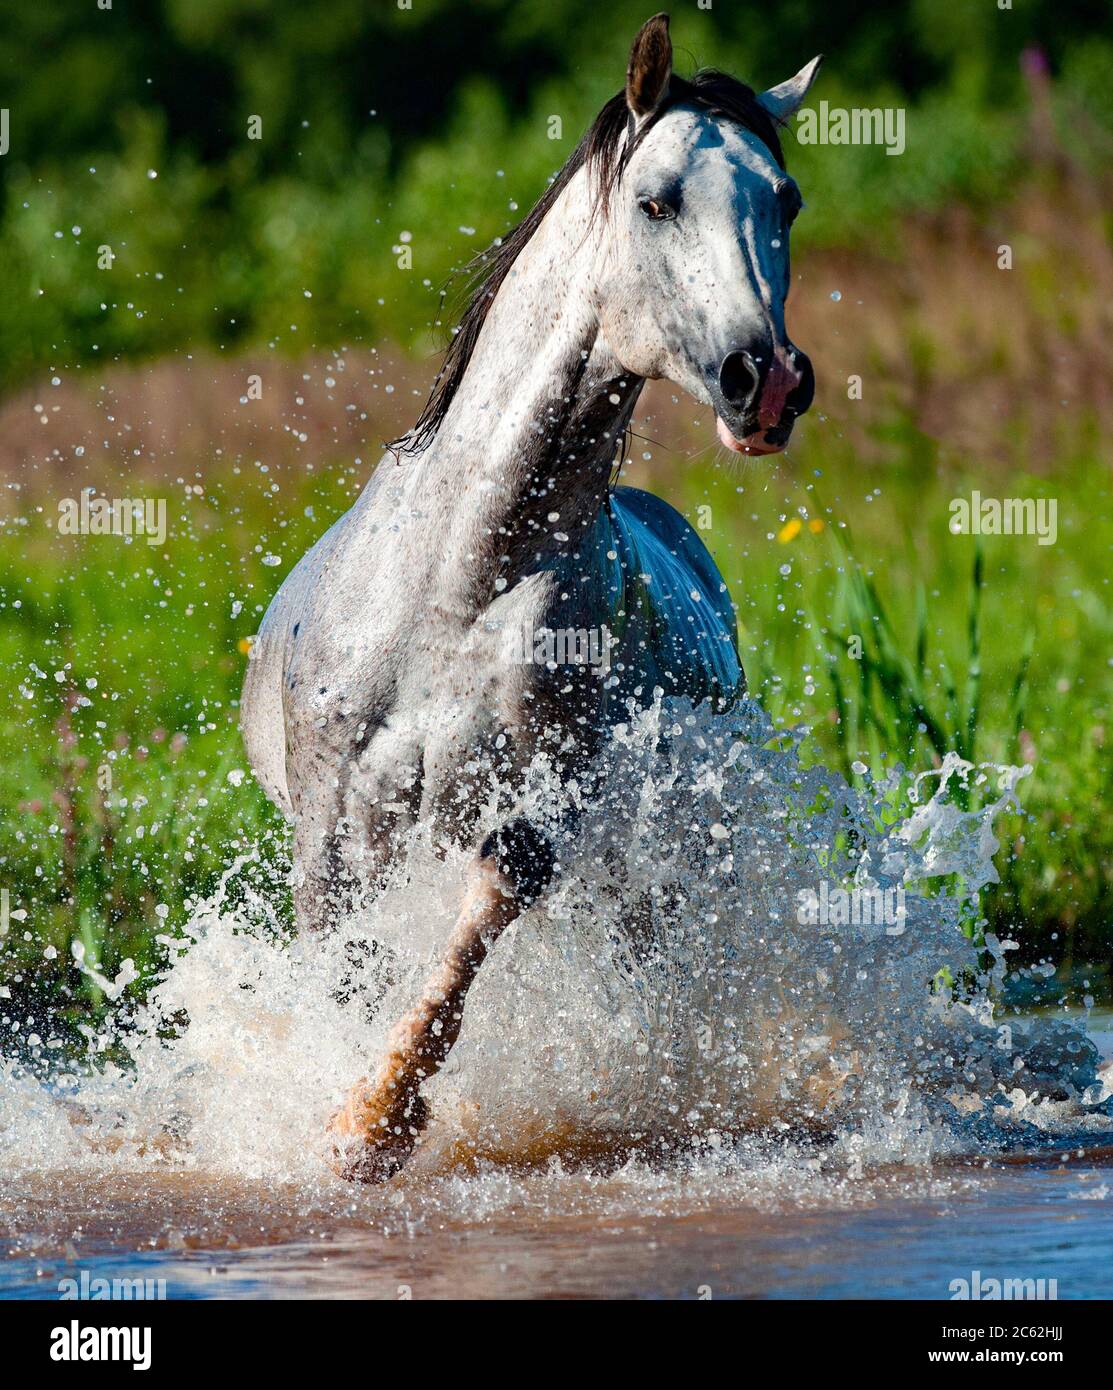 Arab stallion running in water front view Stock Photo